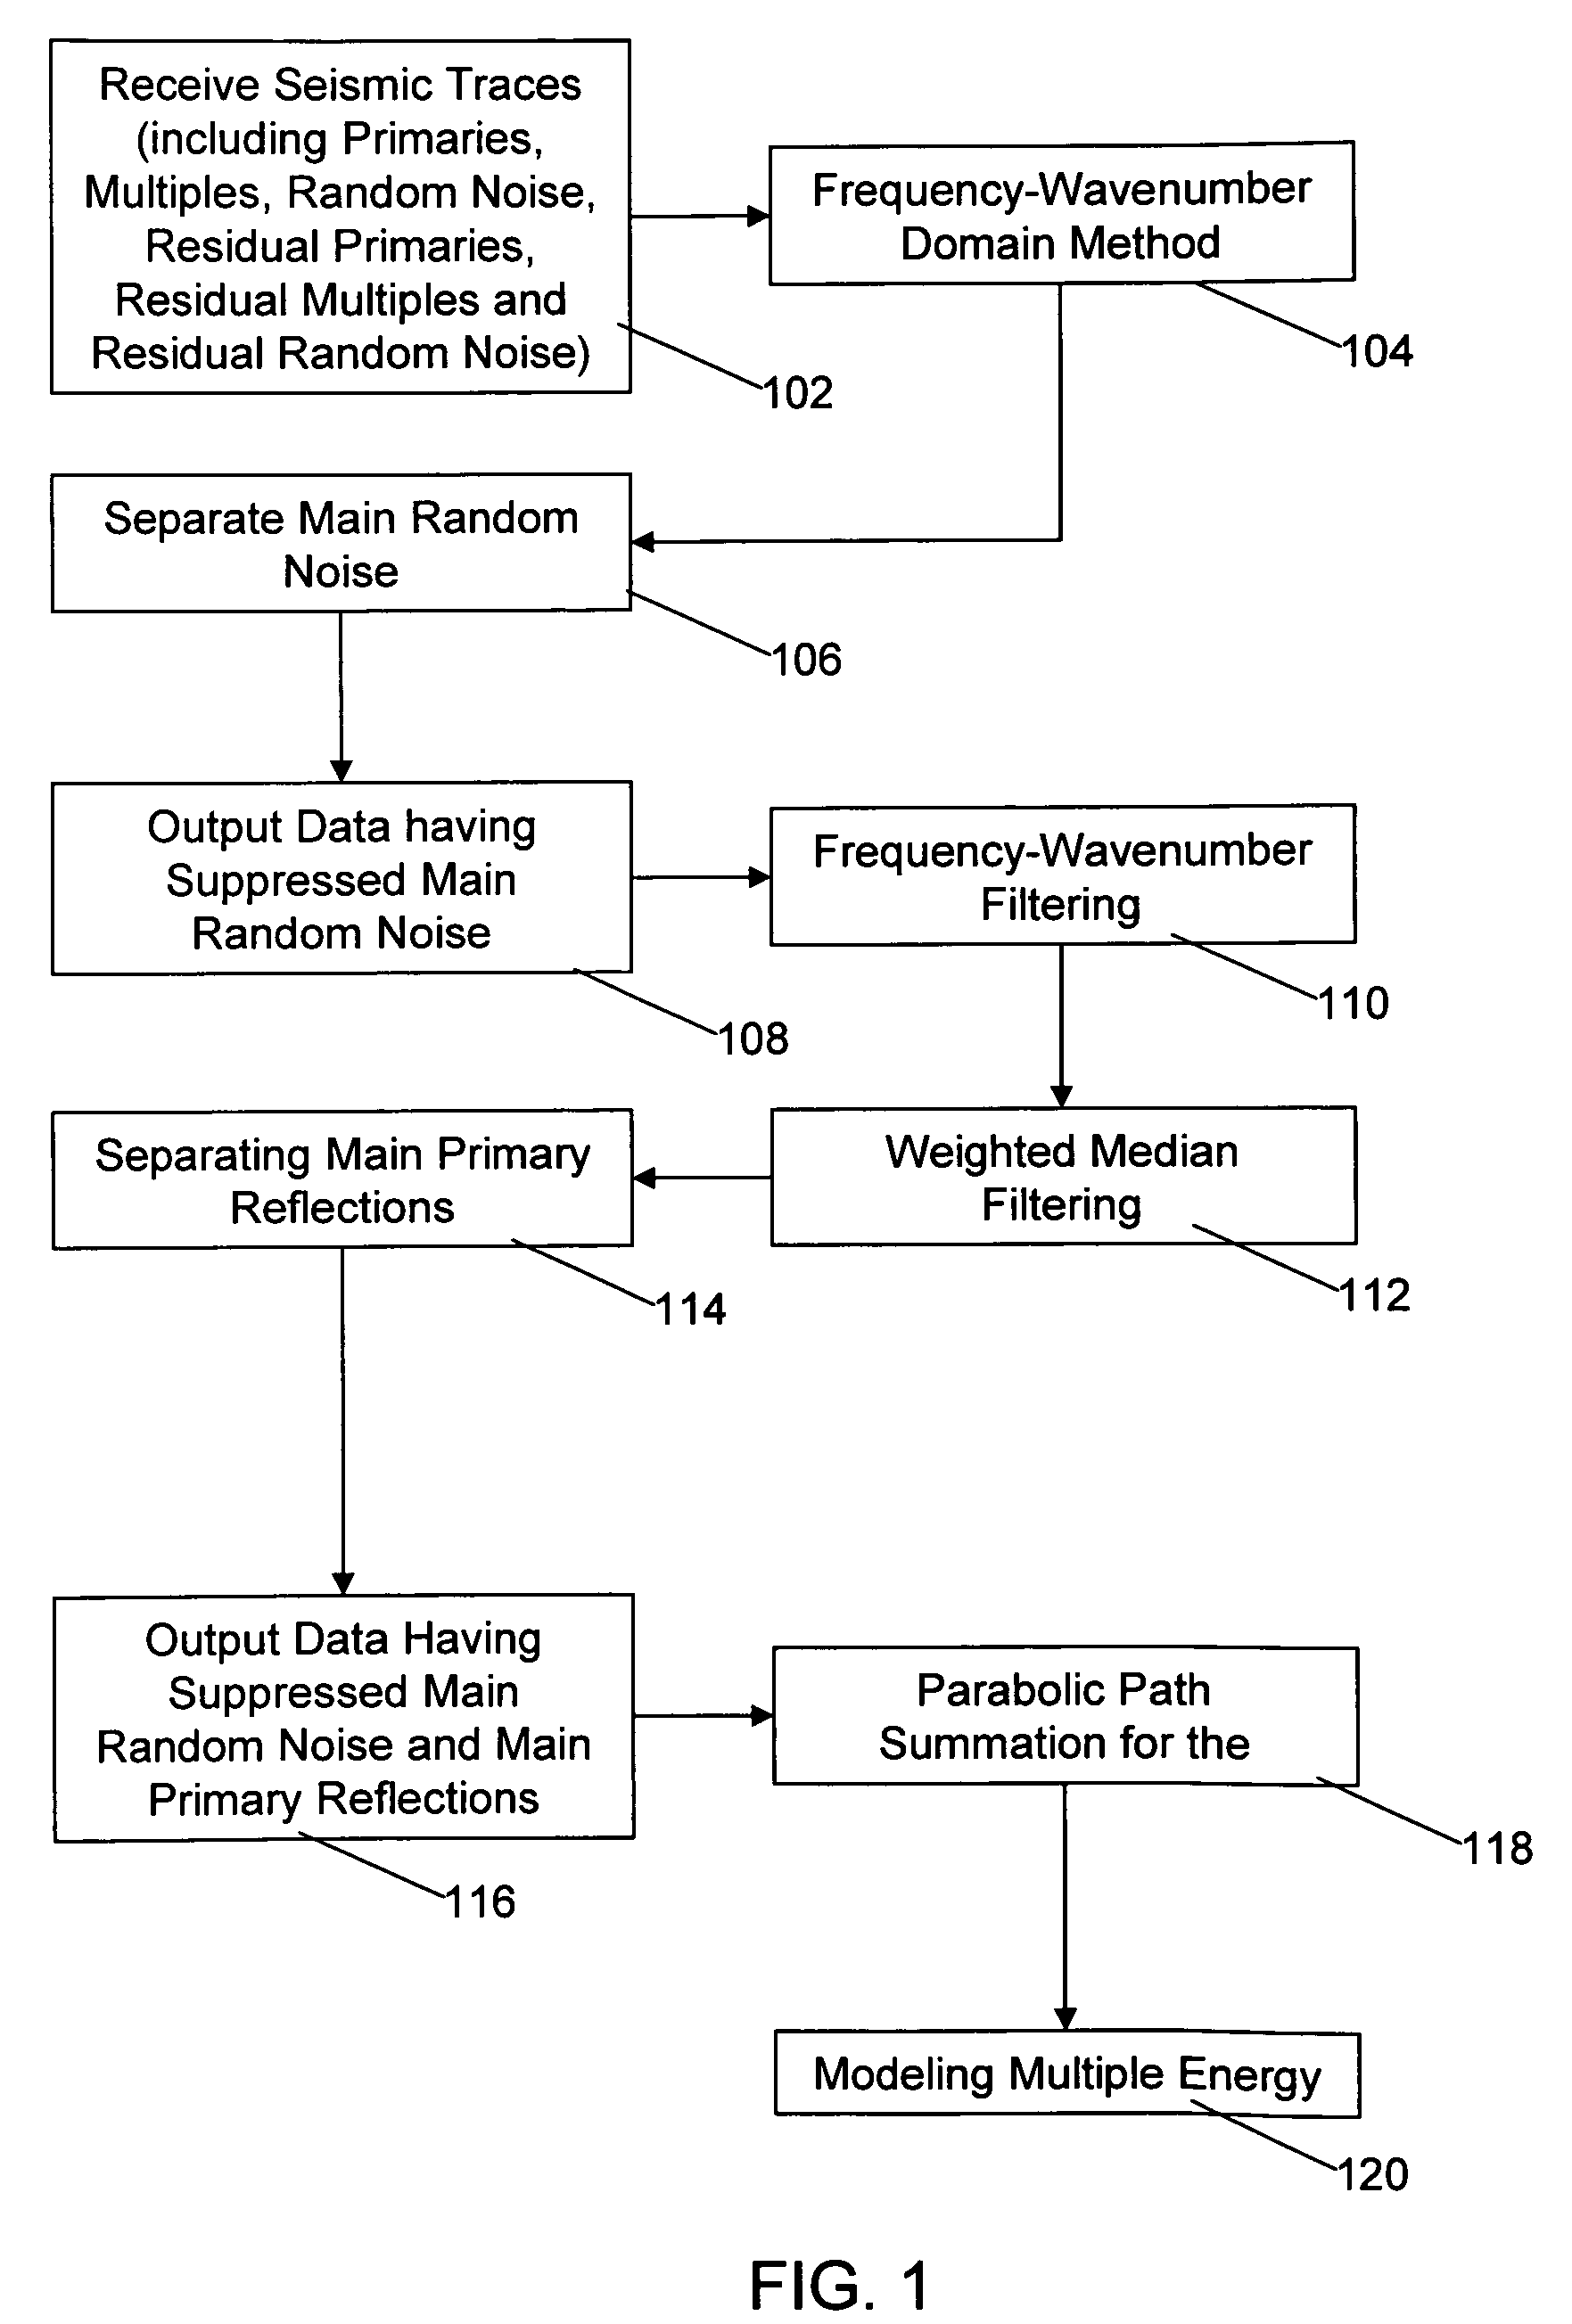 System and method for suppression of seismic multiple reflection signals